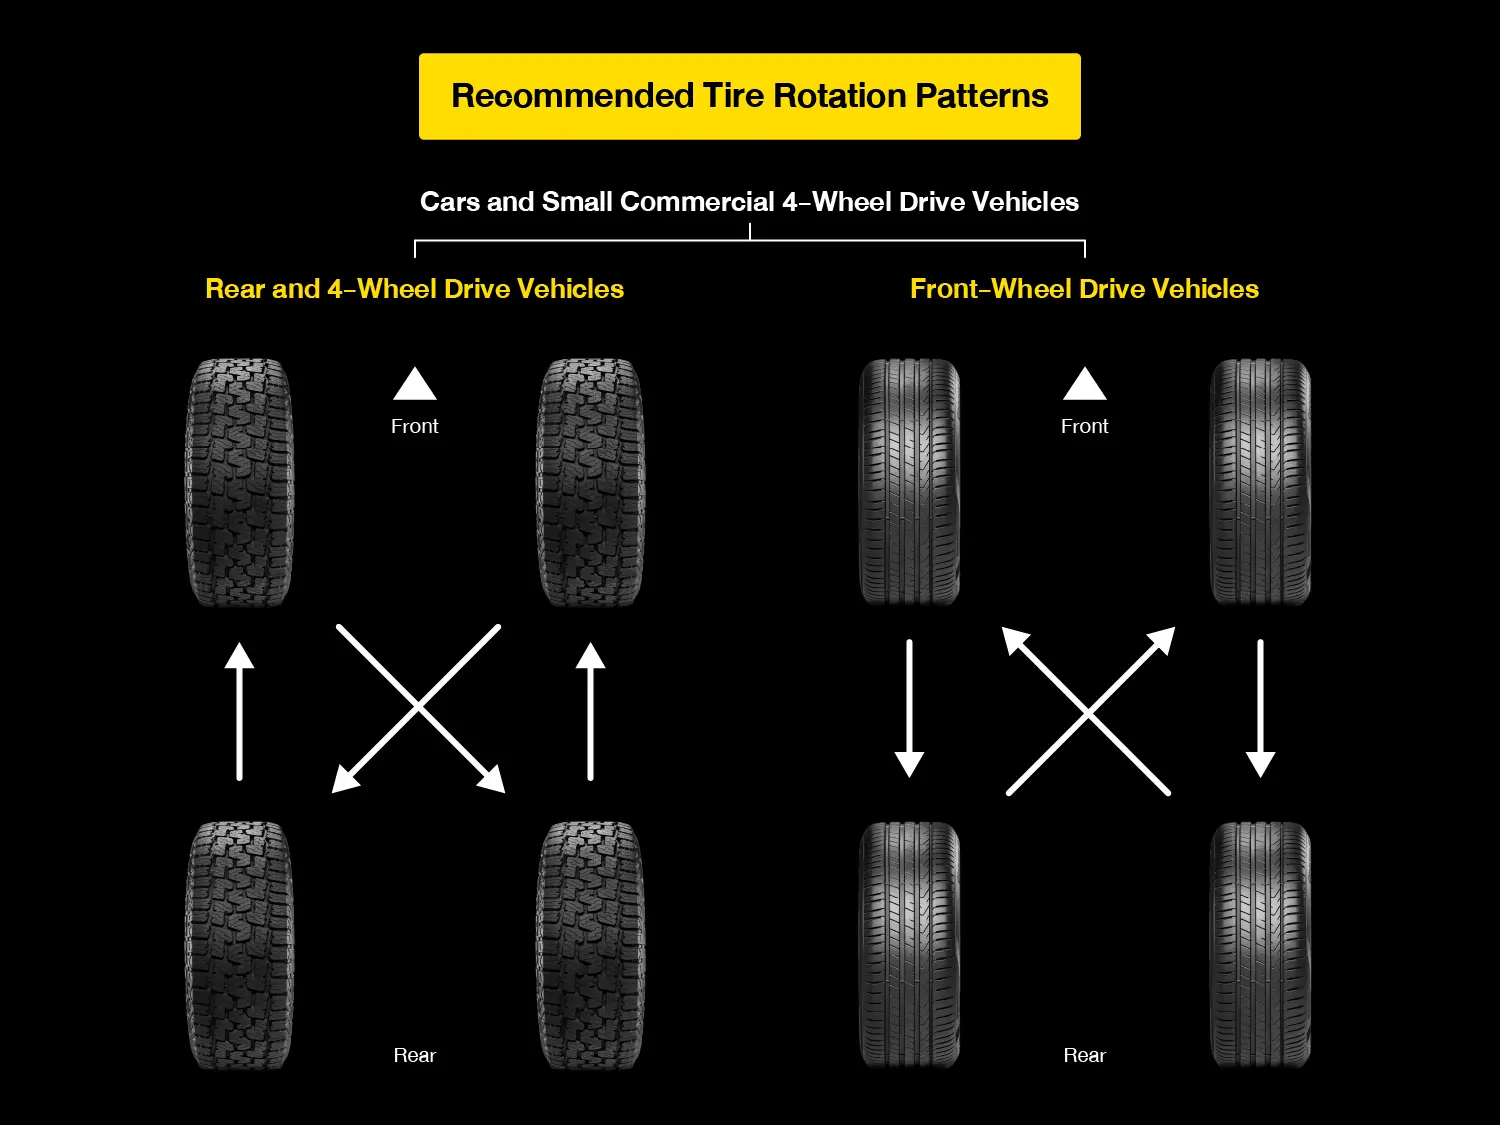 cars and small commercial 4-wheel drive vehicles tire rotation patterns